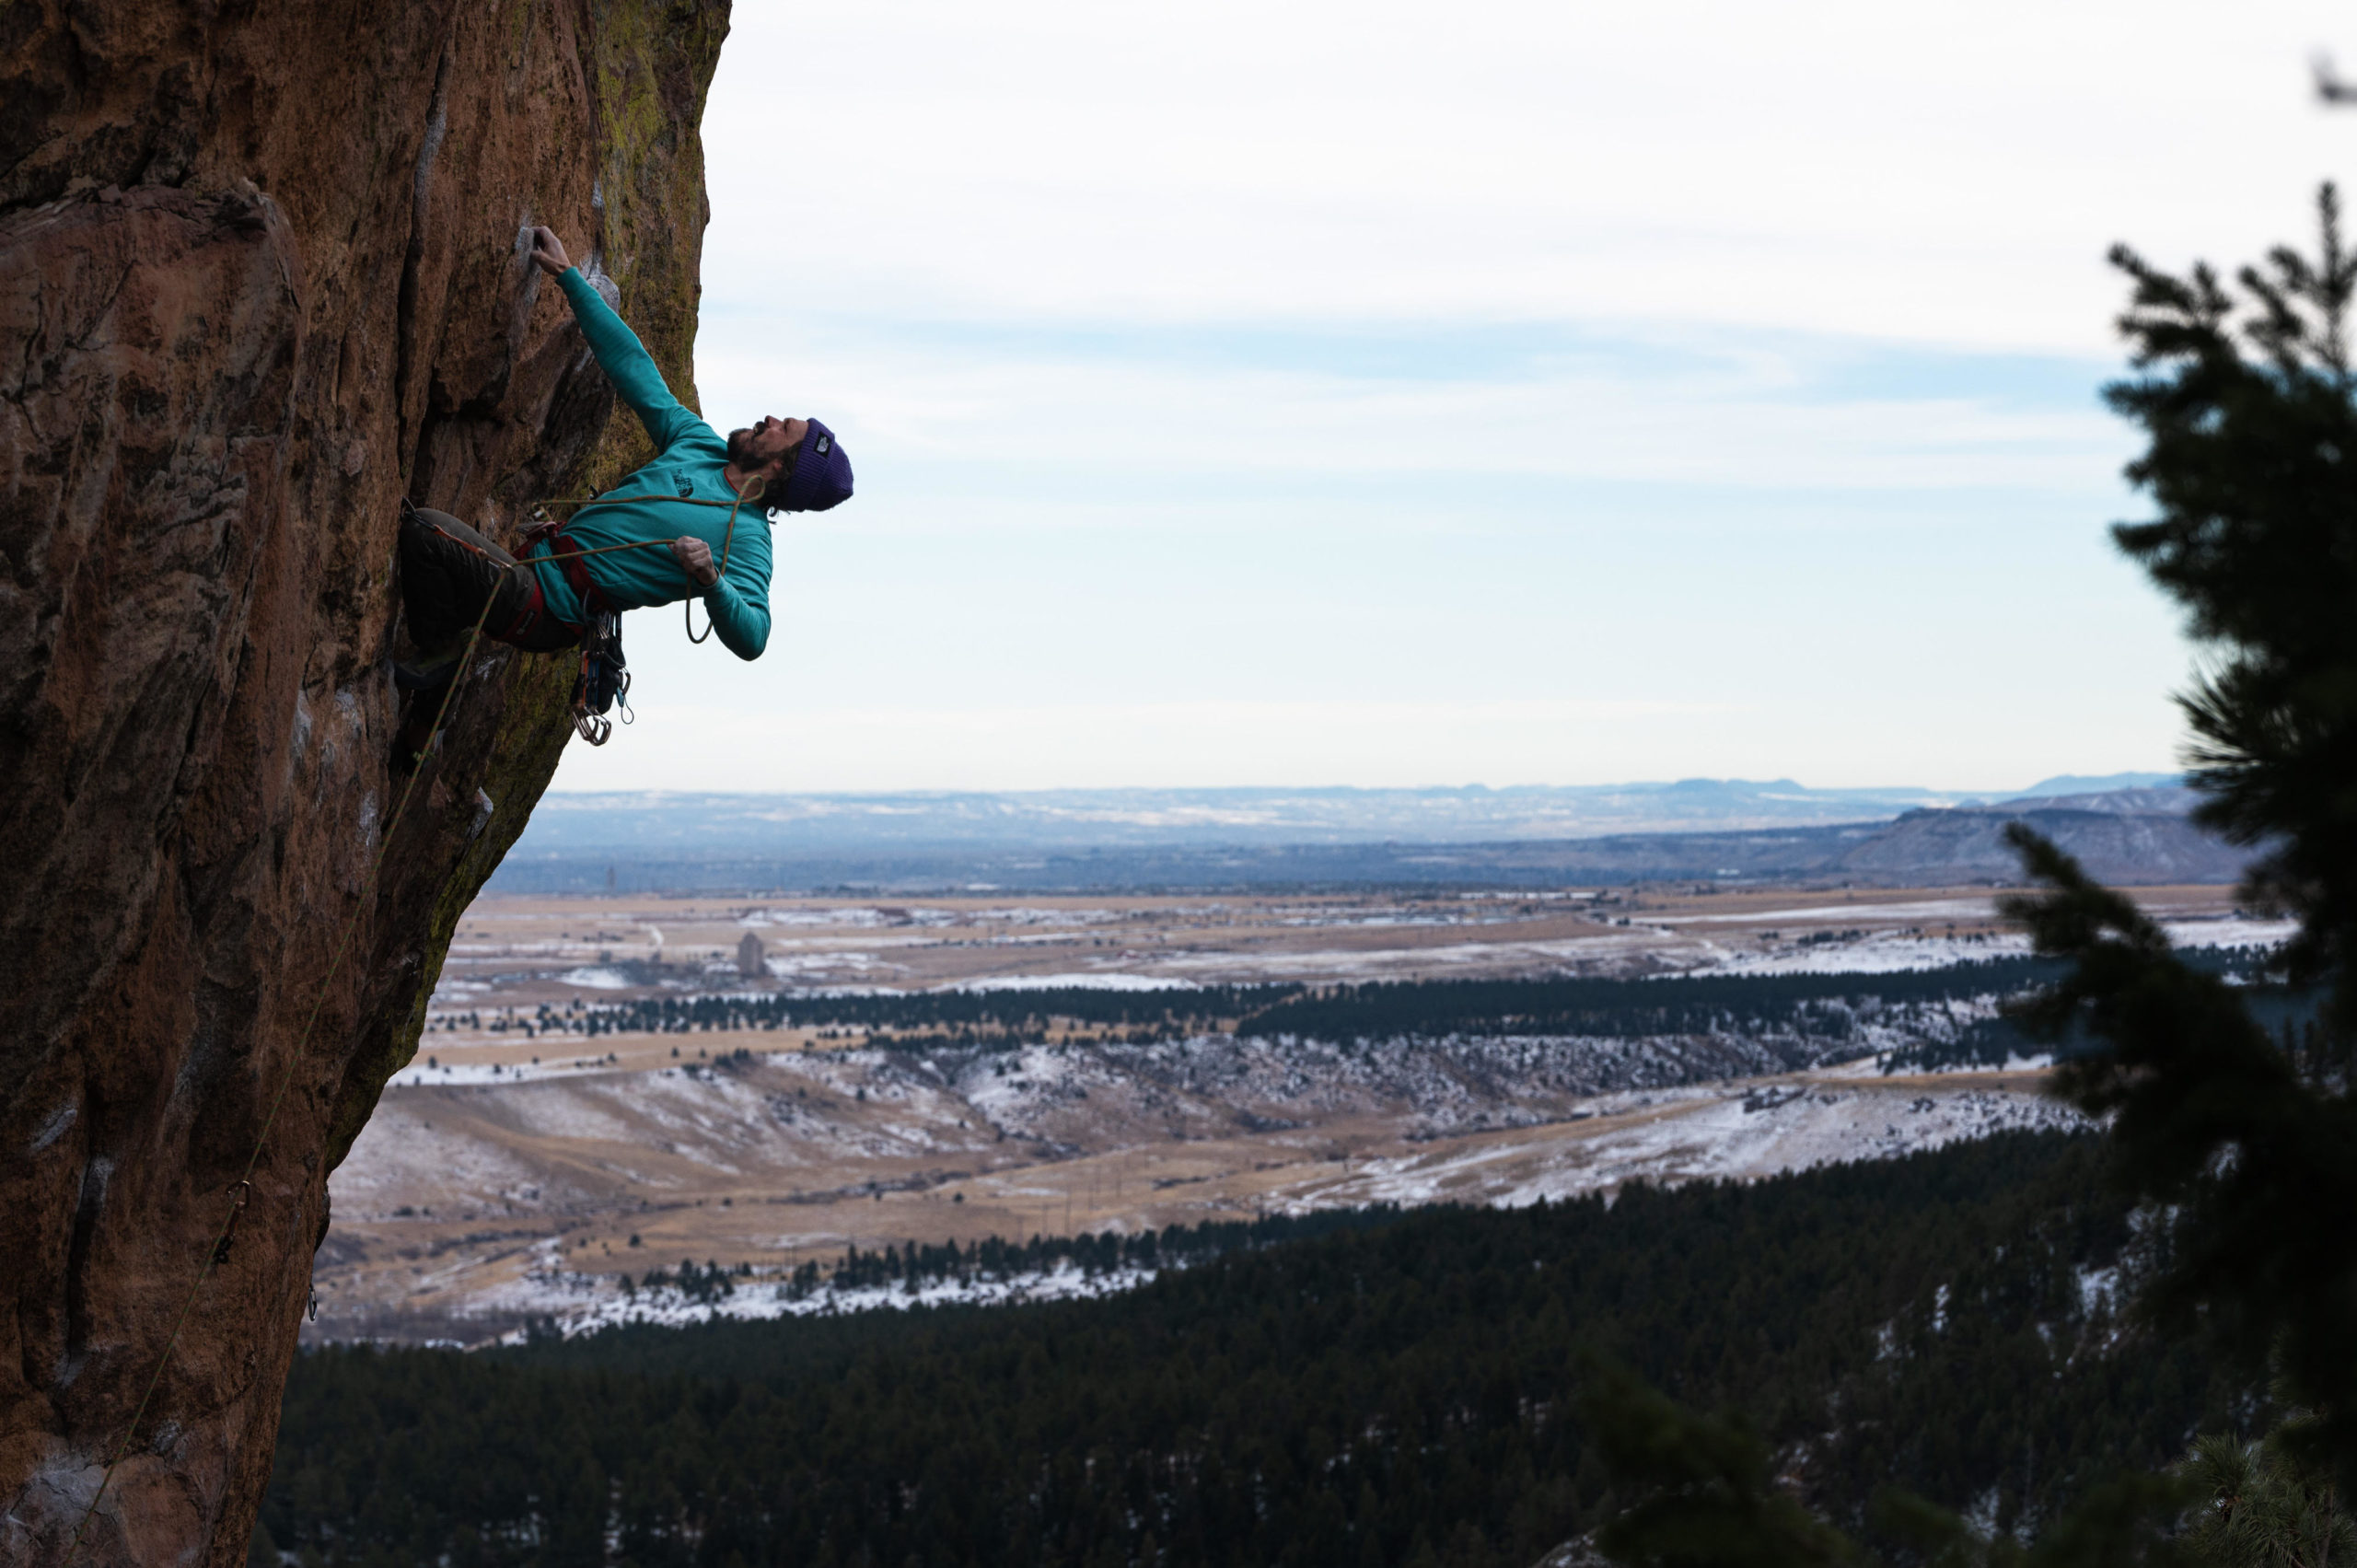 Matt hangs from a rock wall with the snowy Colorado plains in the background. He's lead climbing the route, with one hand hanging onto the wall and the other hand holding the rope.